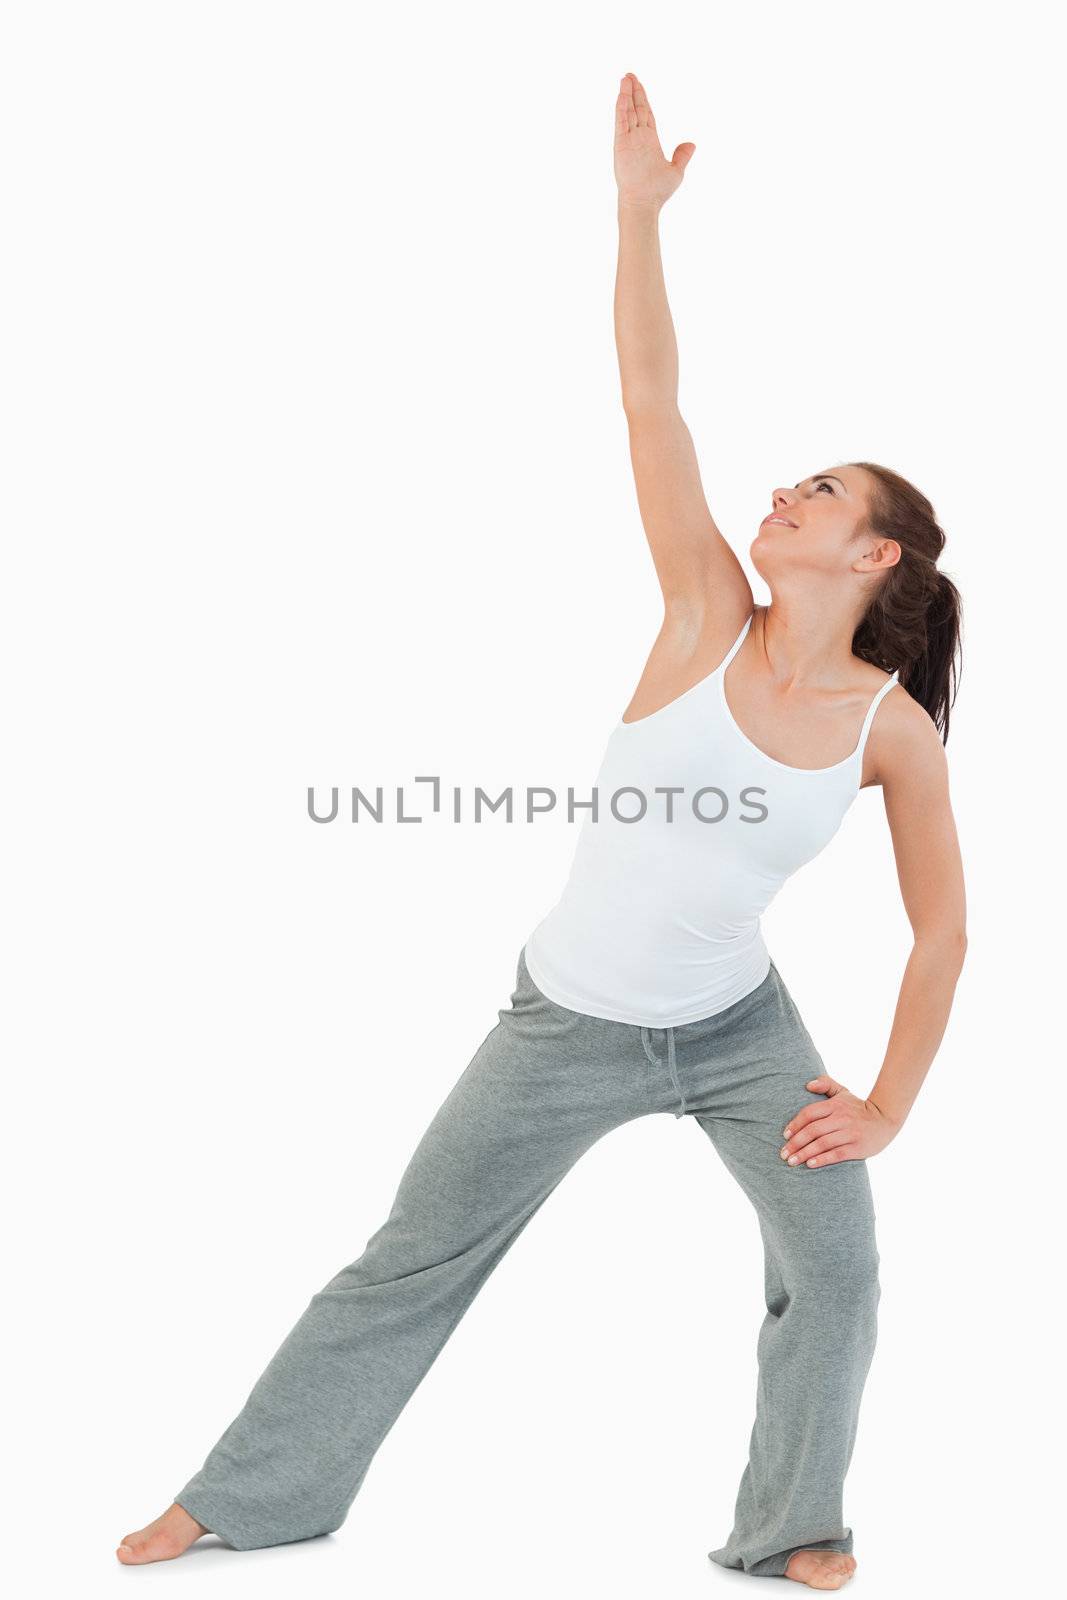 Portrait of a woman in the Utthita Trikonasana position against a white background